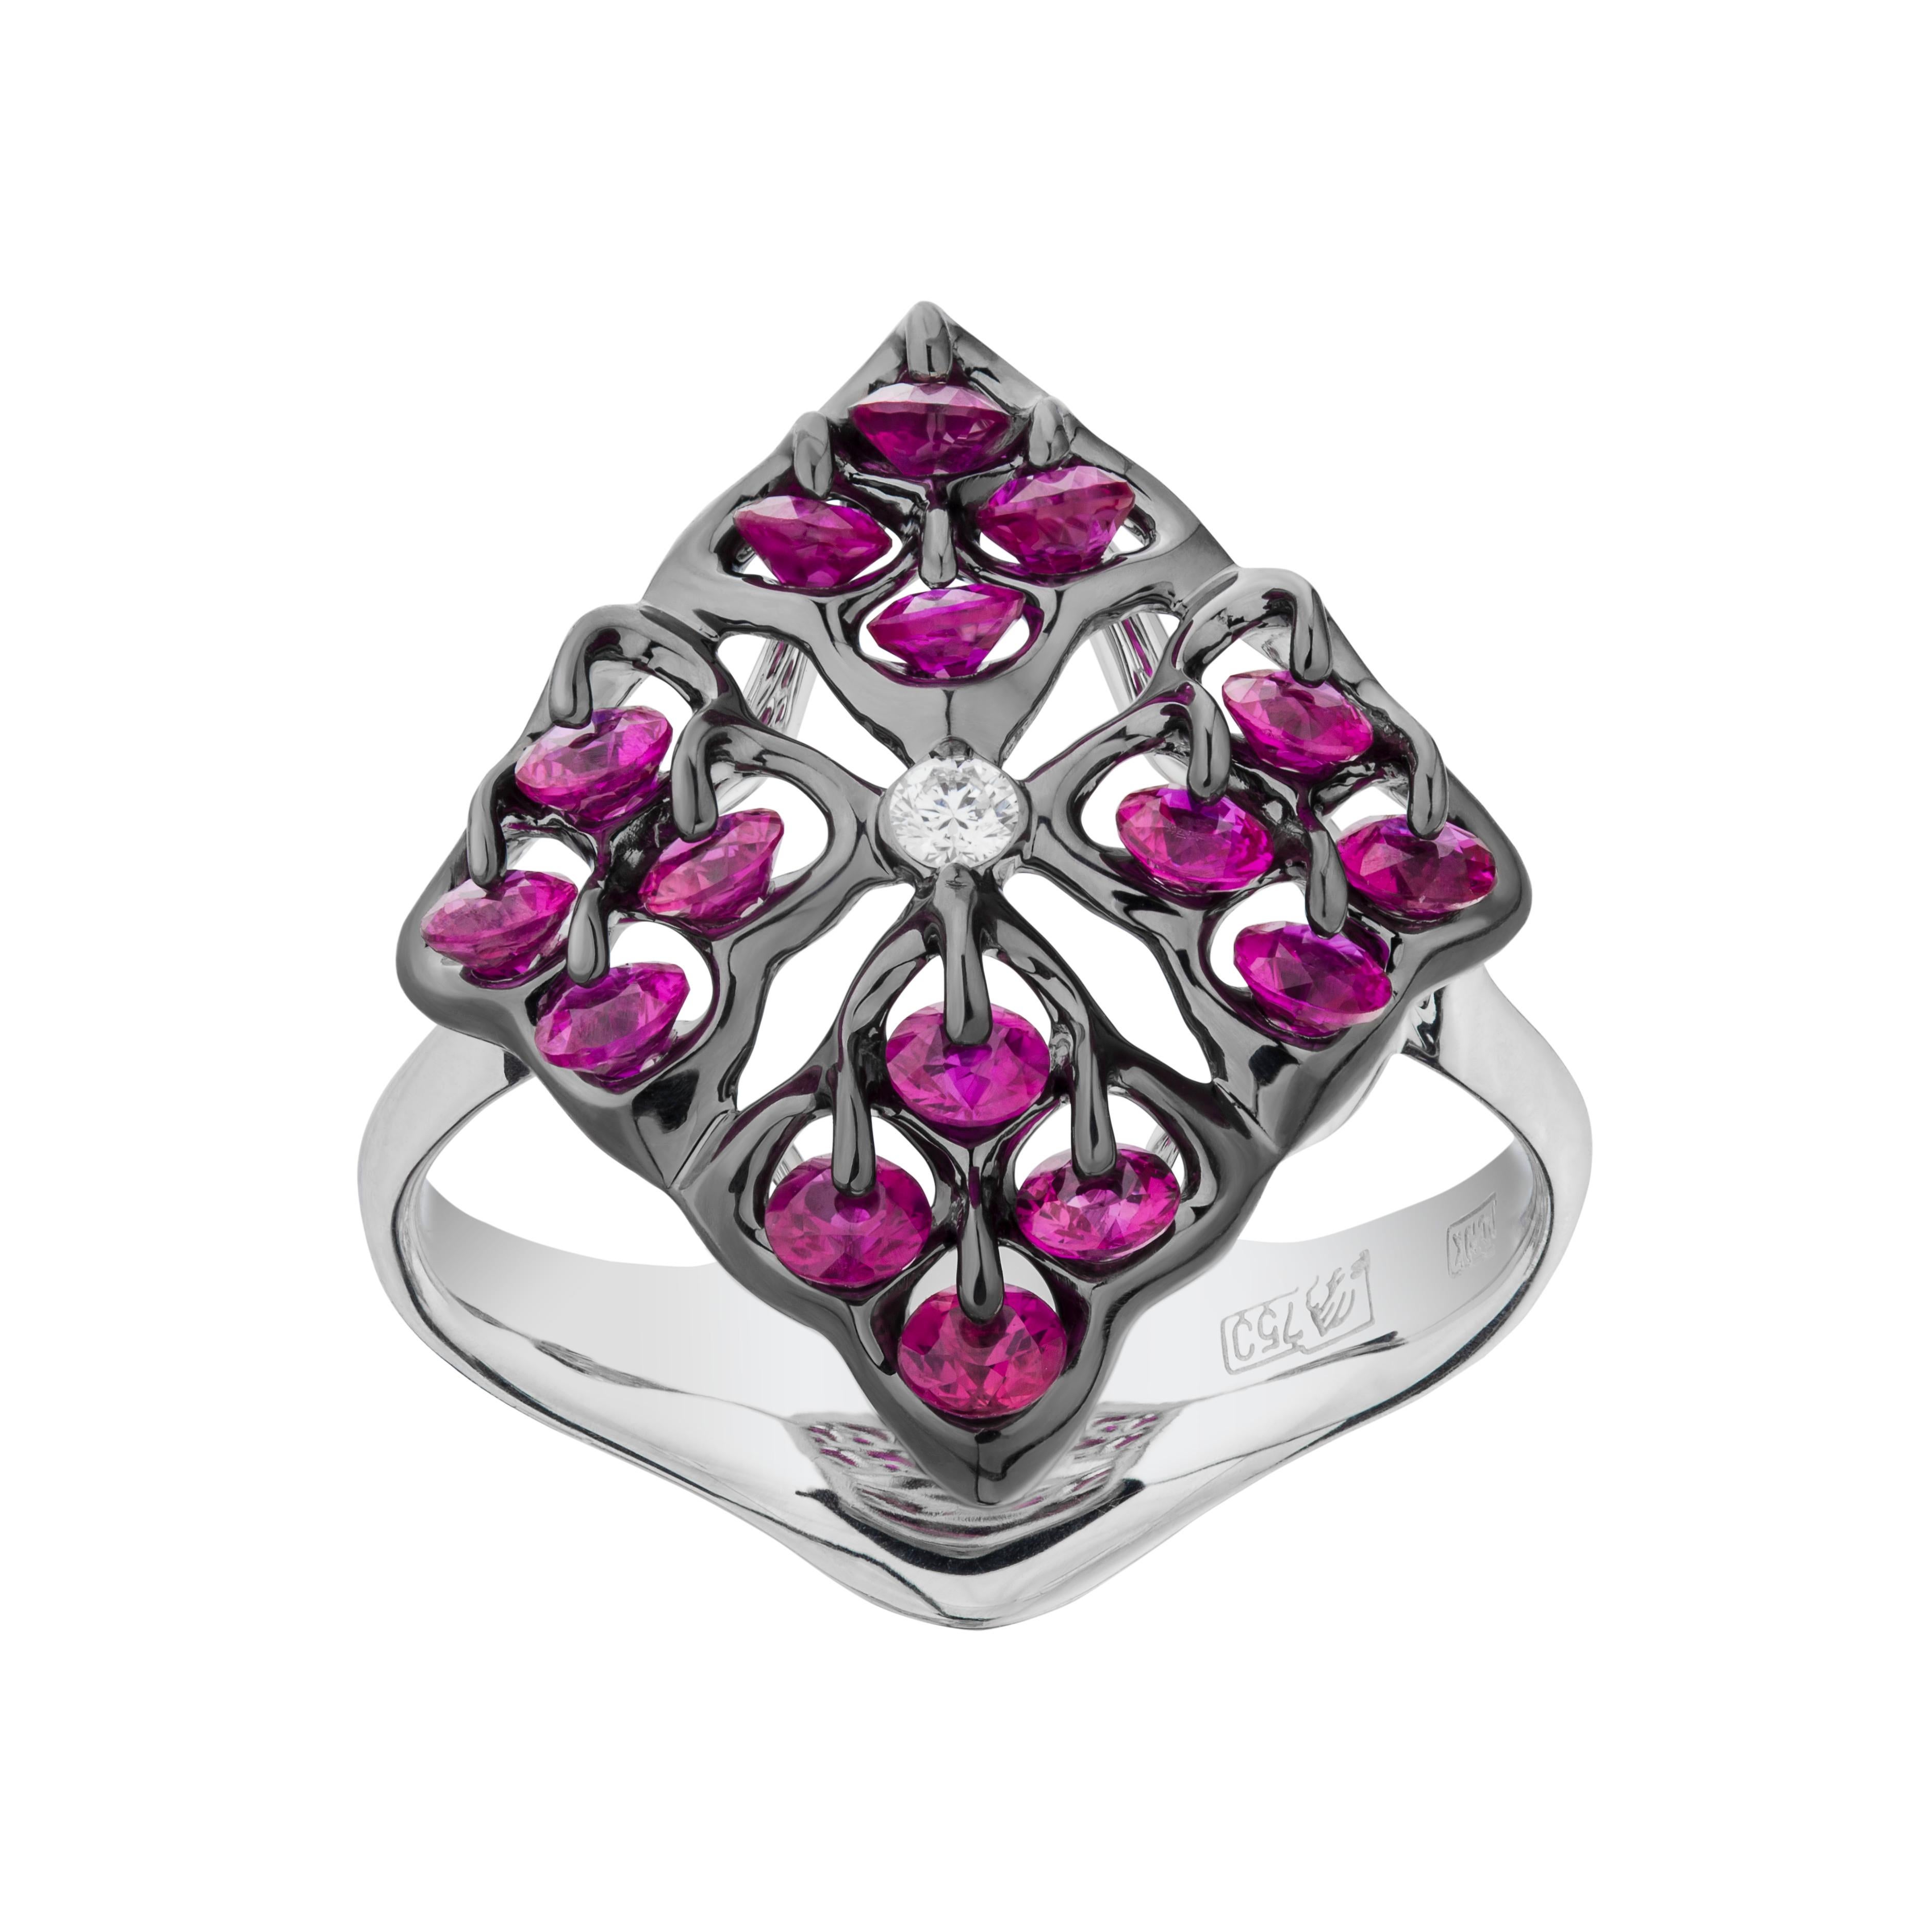 Inspired by famous Russian Ballet, this Prima Star Ruby ring created by MOISEIKIN charms your day with the exceptional hue and uniqueness. The design is created  with the patented stone setting technology which a gemstone rotates freely while